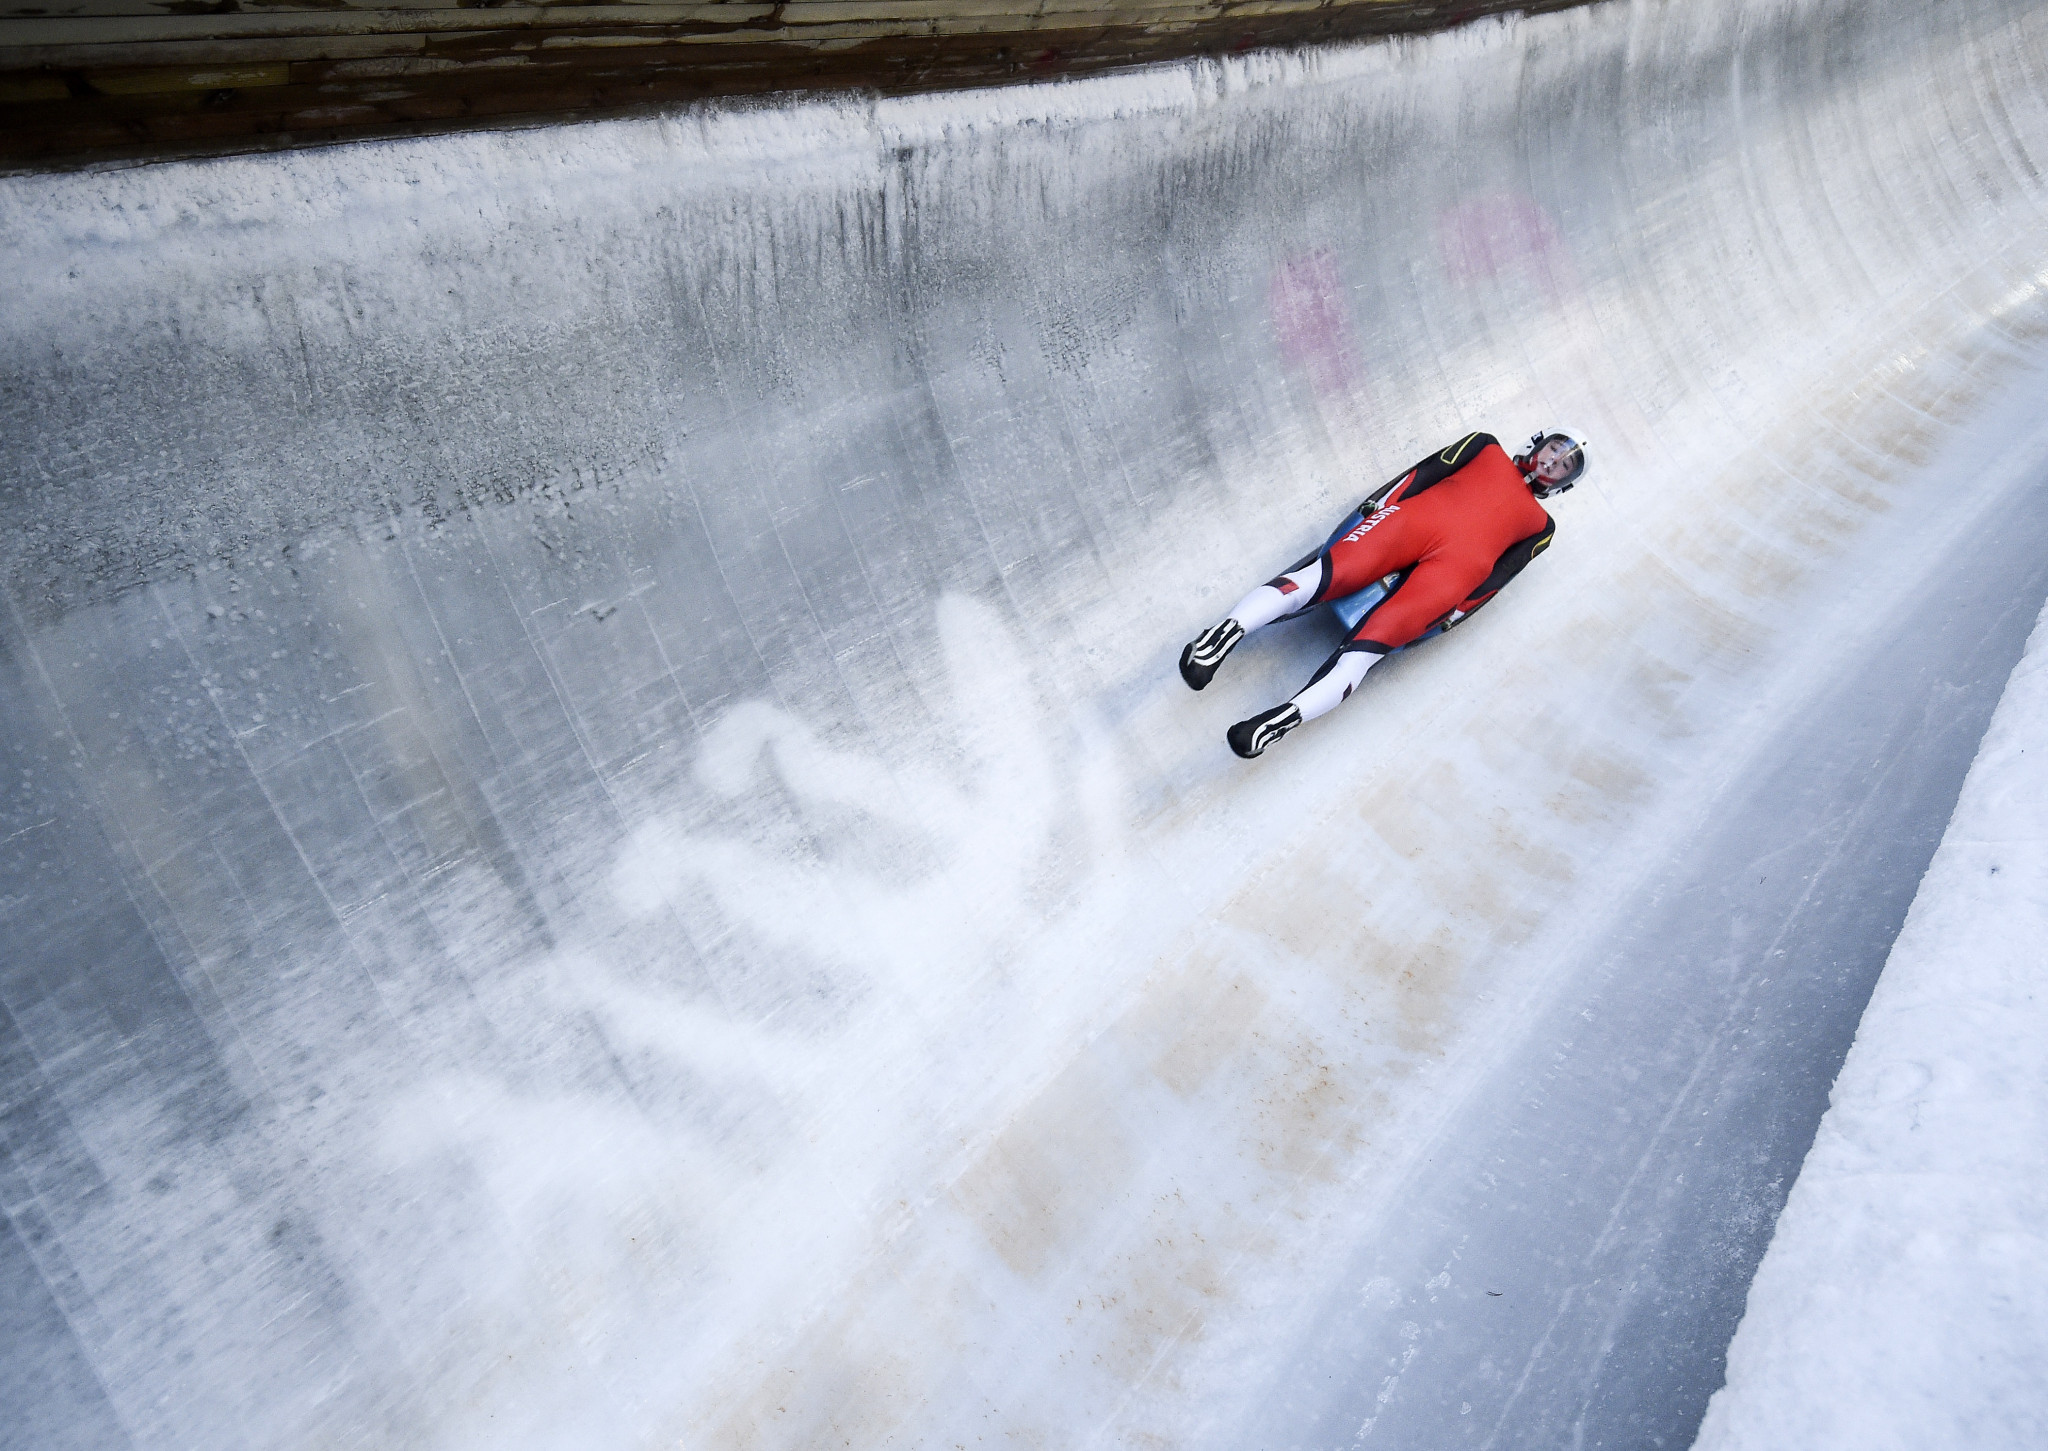 The event was held at the Lillehammer Sliding Centre ©Getty Images